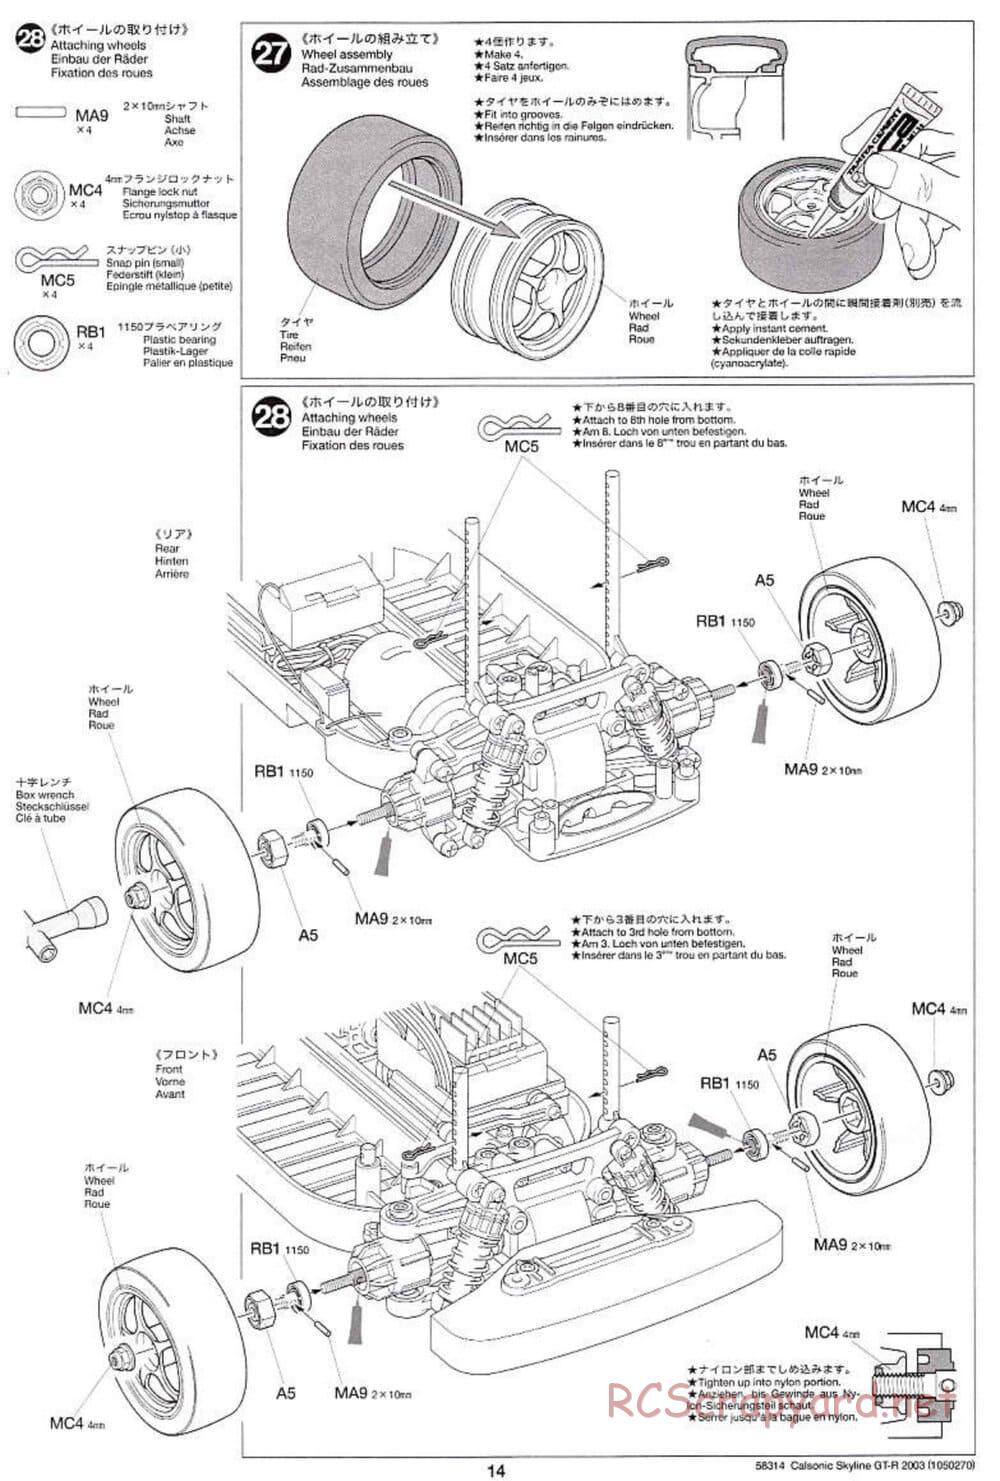 Tamiya - Calsonic Skyline GT-R 2003 - TT-01 Chassis - Manual - Page 14